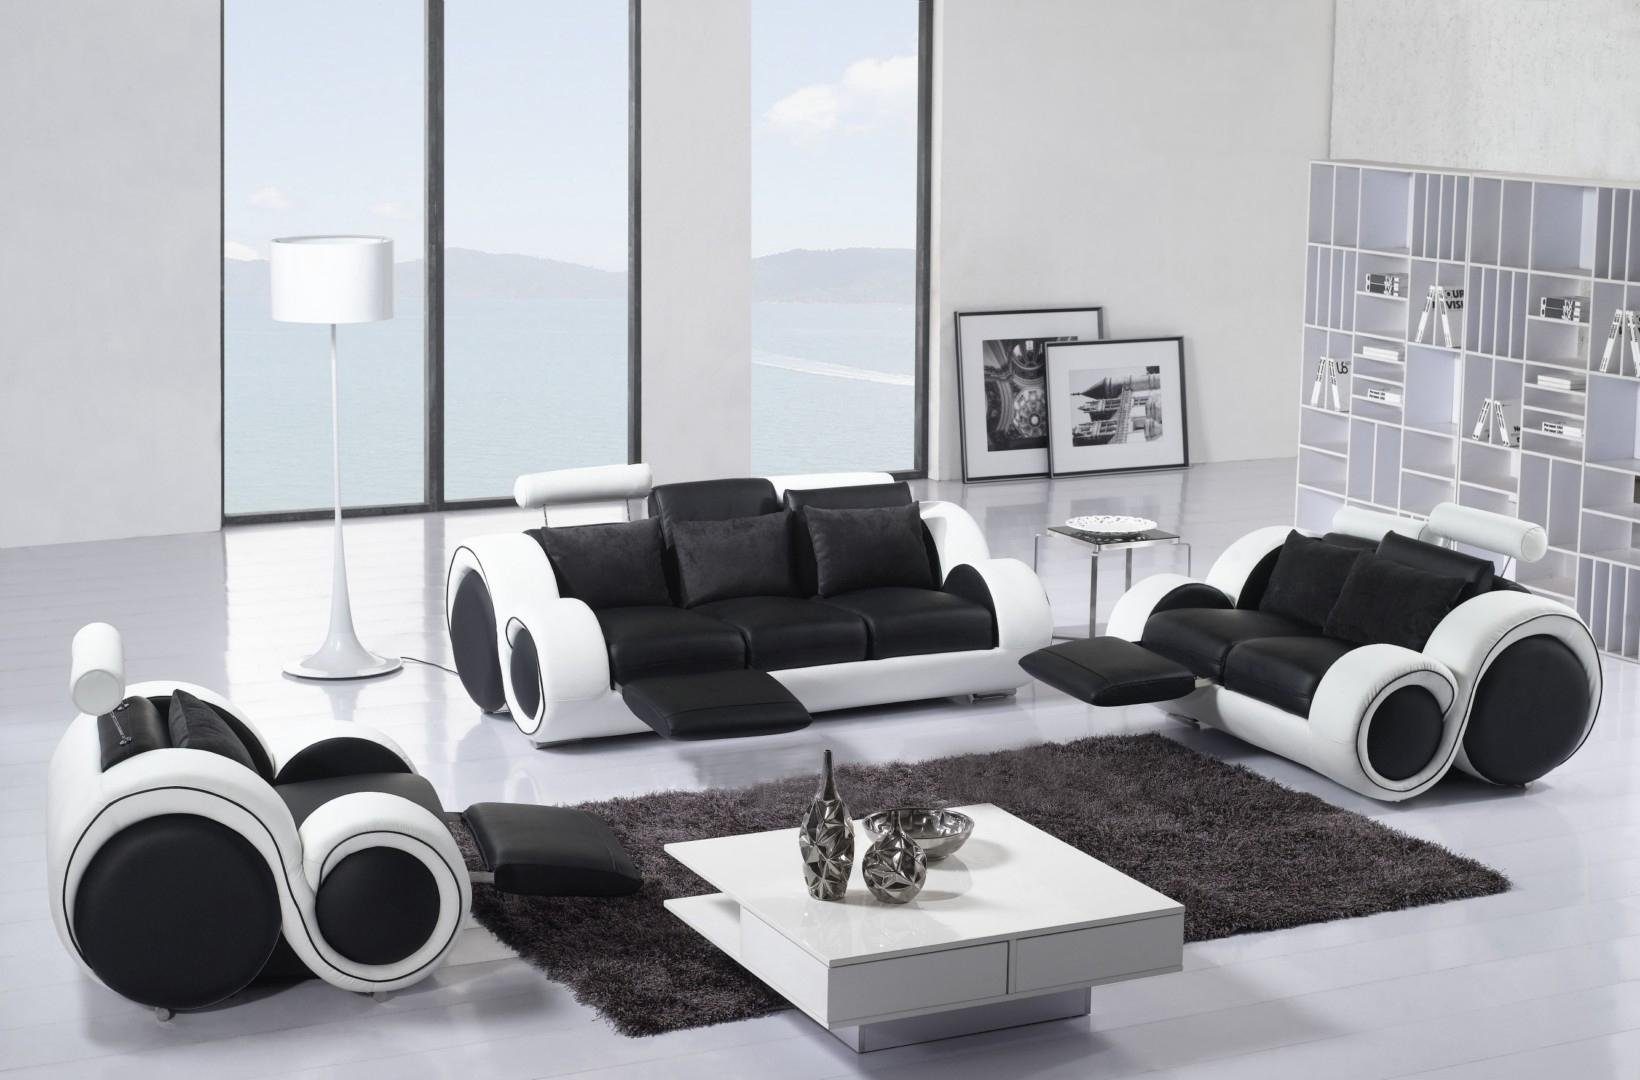 JVmoebel Sofa Moderne Sofagarnitur 3+2+1 Relax Funktion Sitzer Sofa Couch, Made in Europe